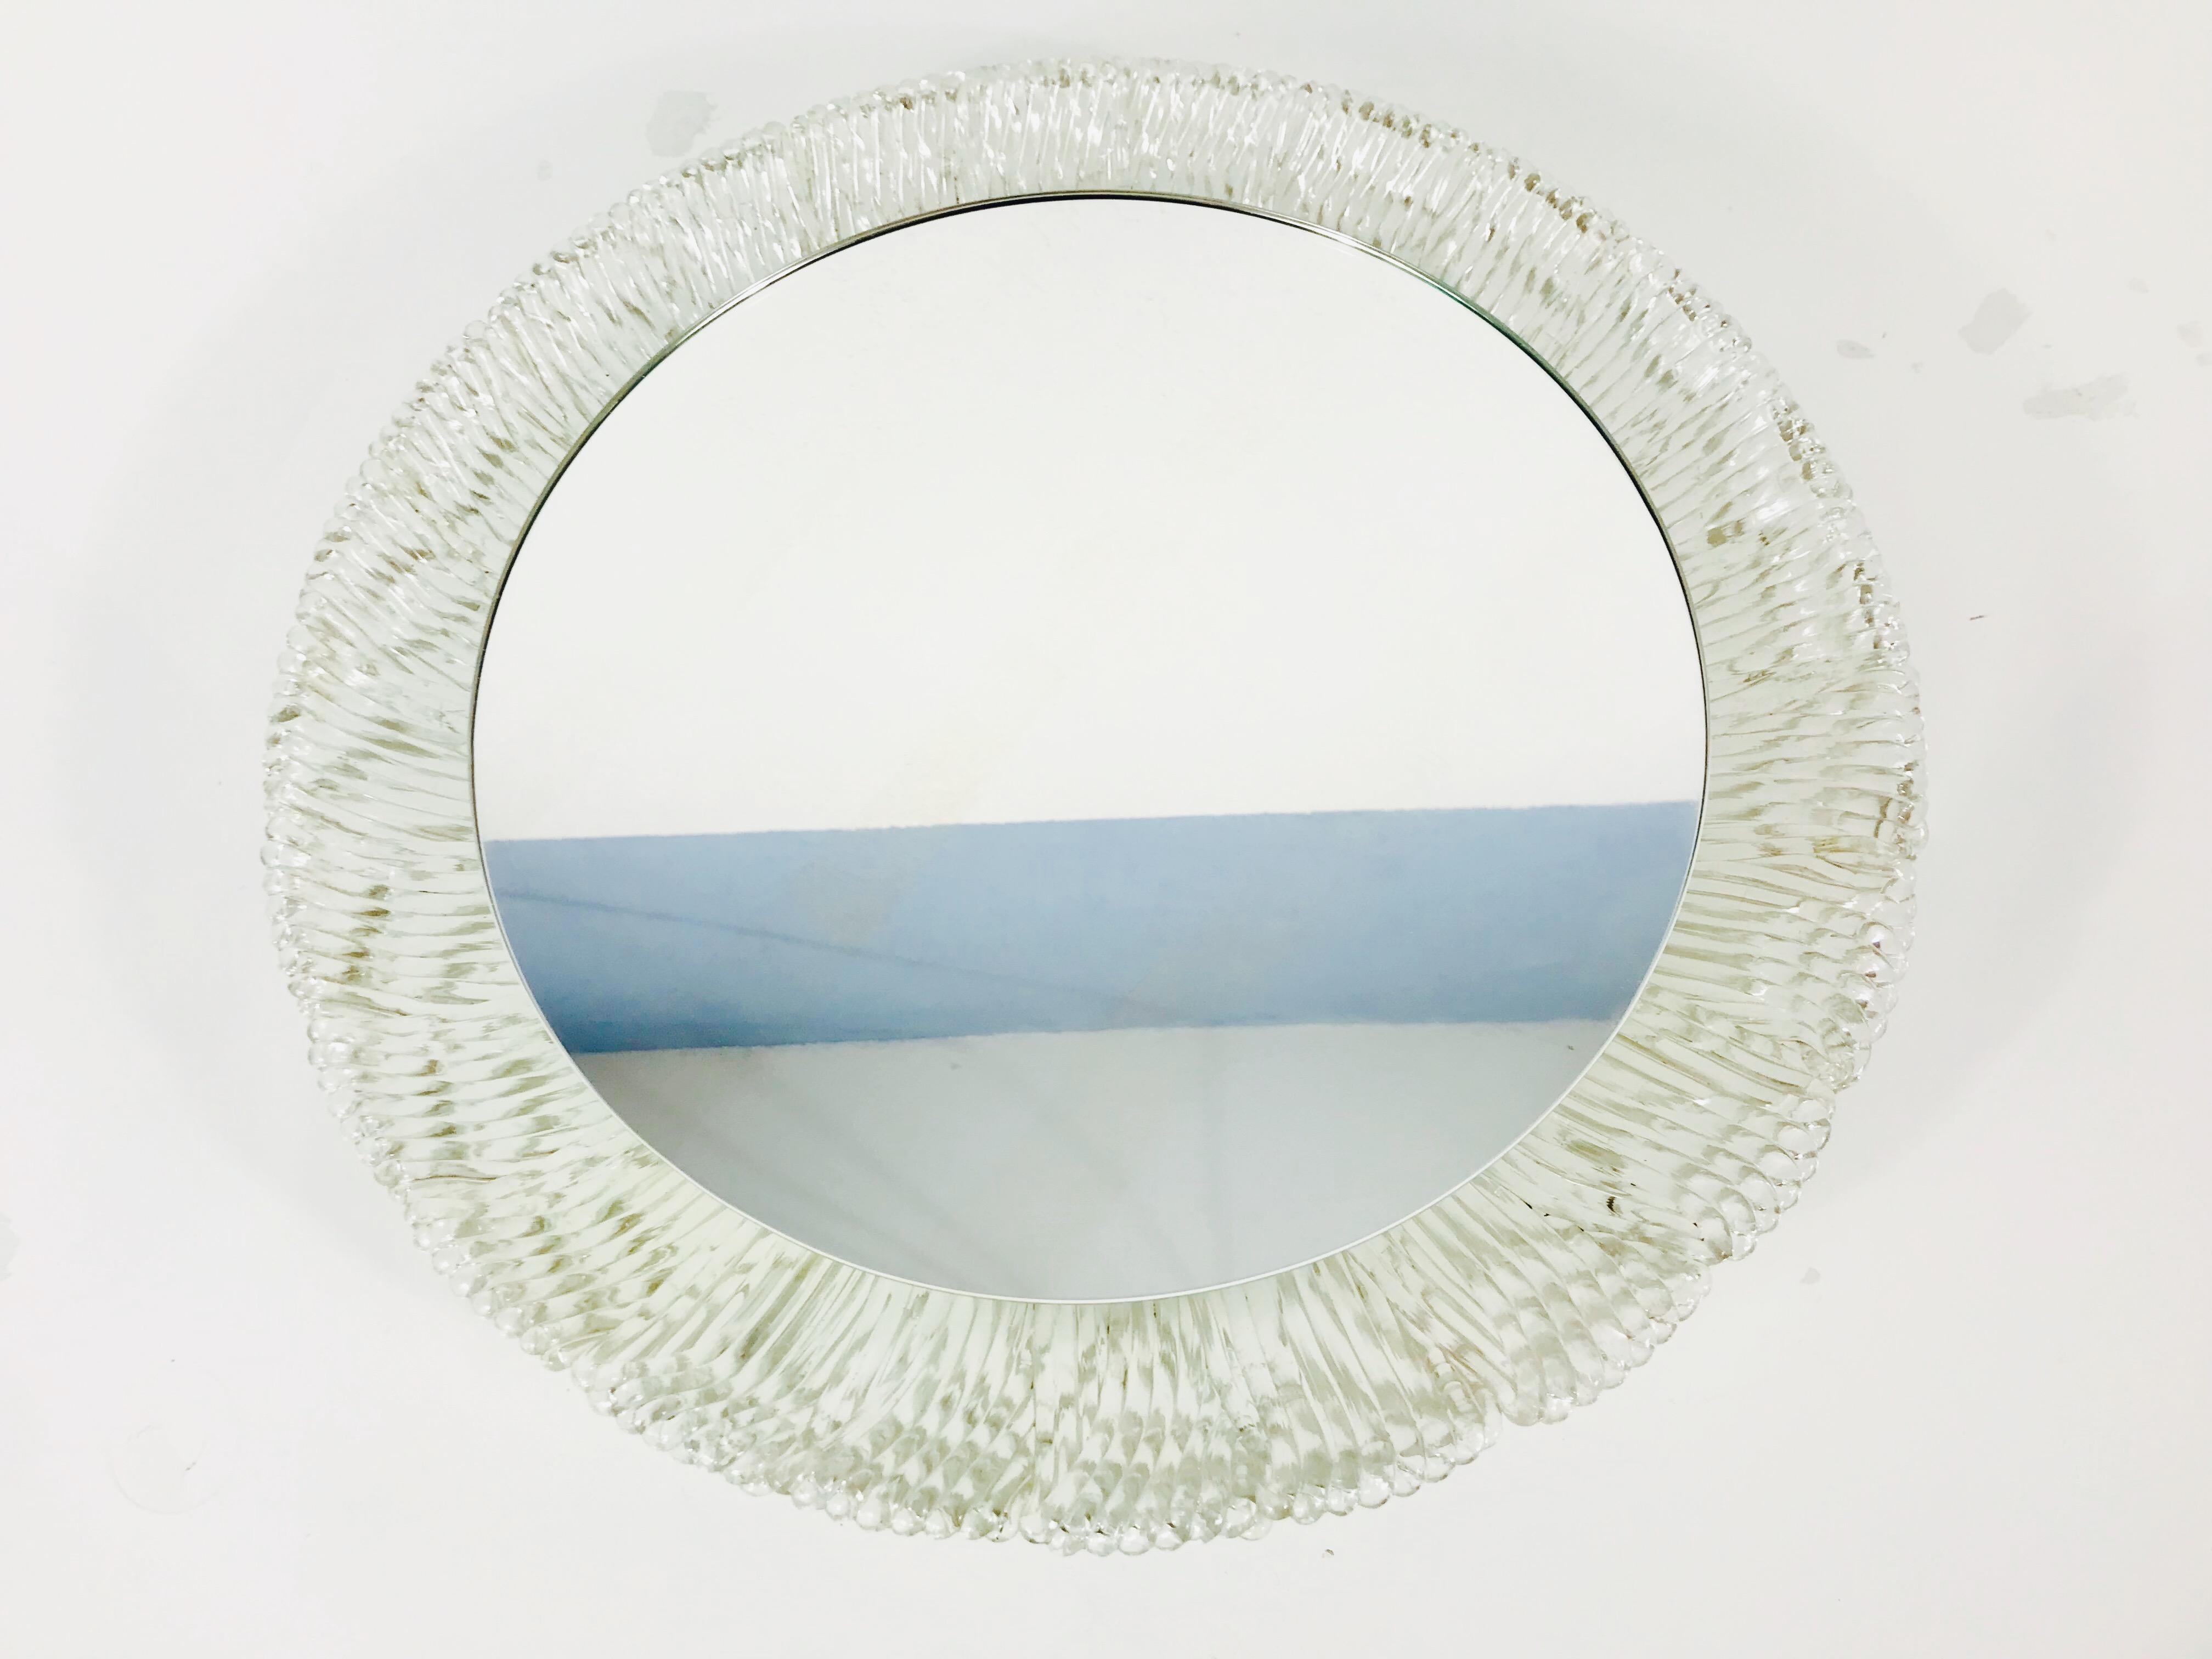 An illuminated wall mirror from the German manufacturer Hillebrand Lighting. It was made in the 1970s. The mirror has an oval acrylic design. There are E14 light bulbs inside the frame. The mirror is in a good vintage condition.